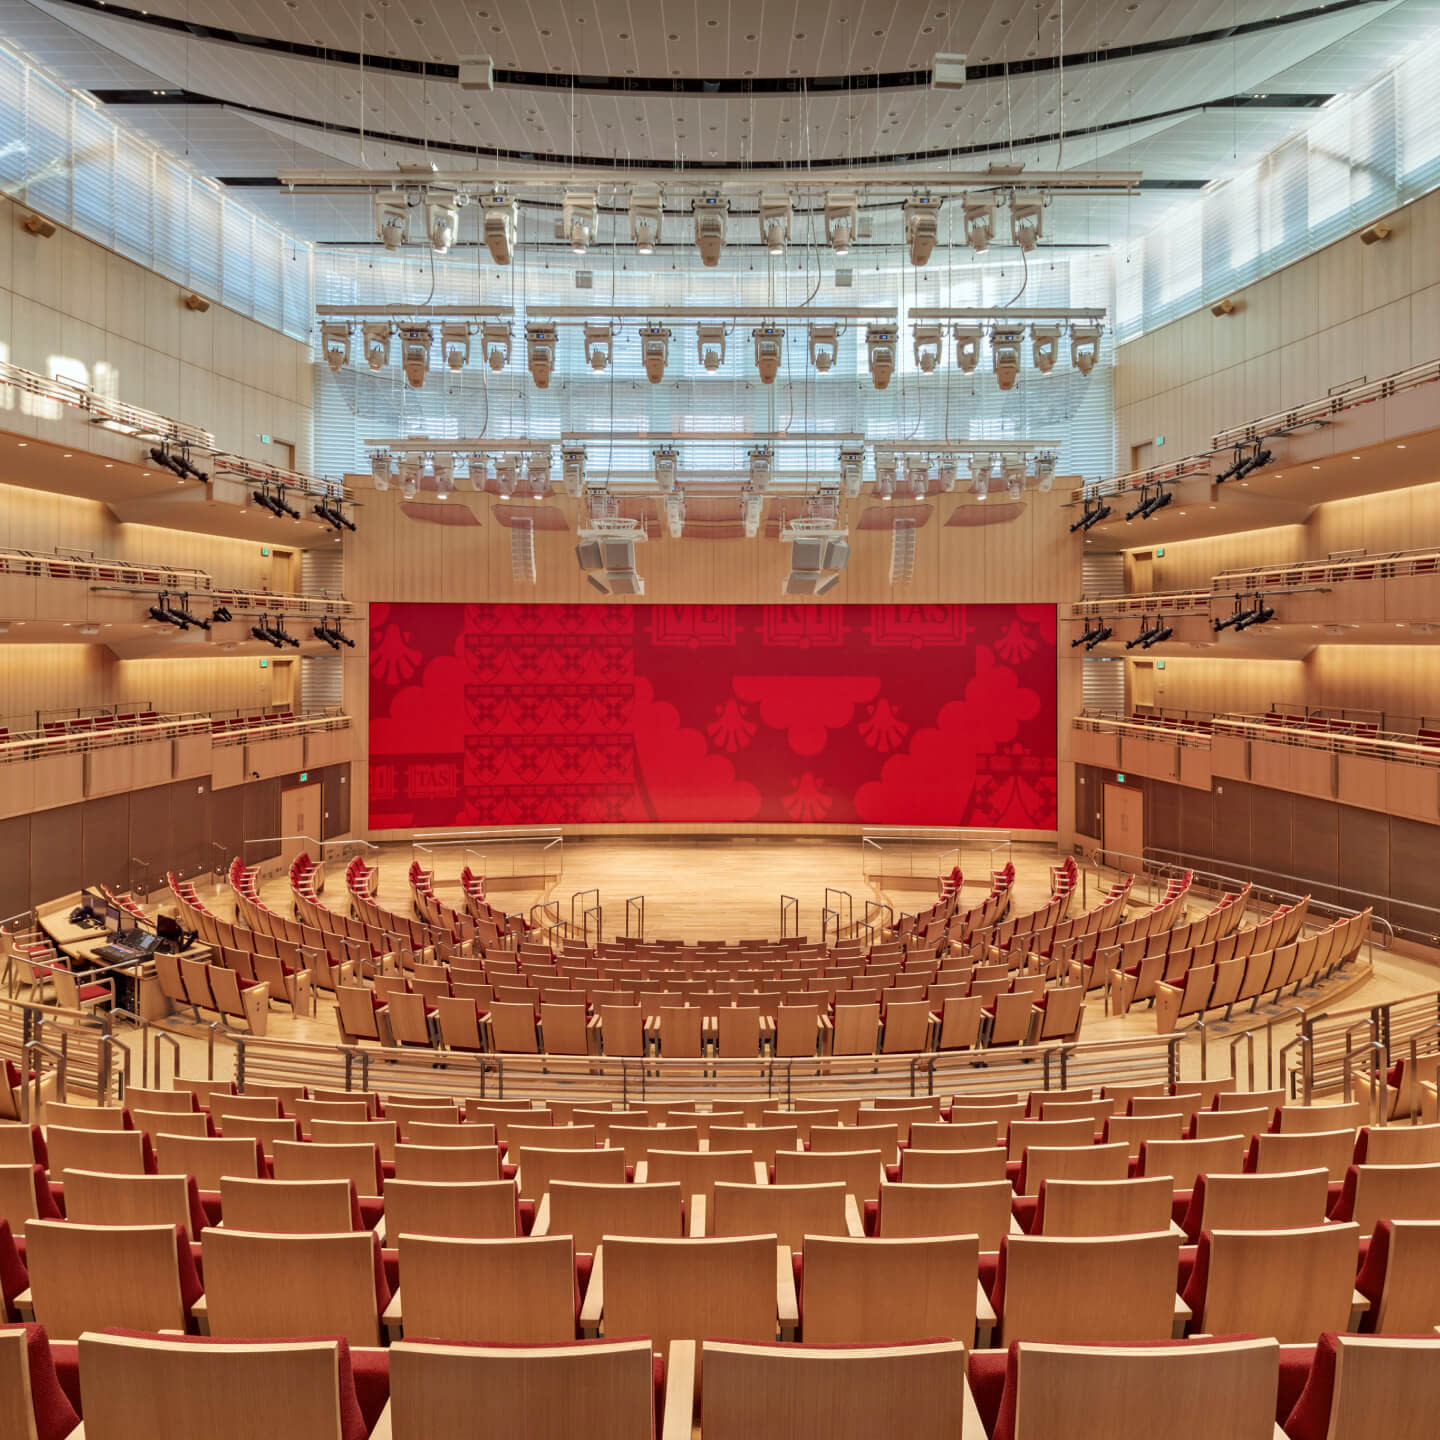 Concert hall seen from the seats